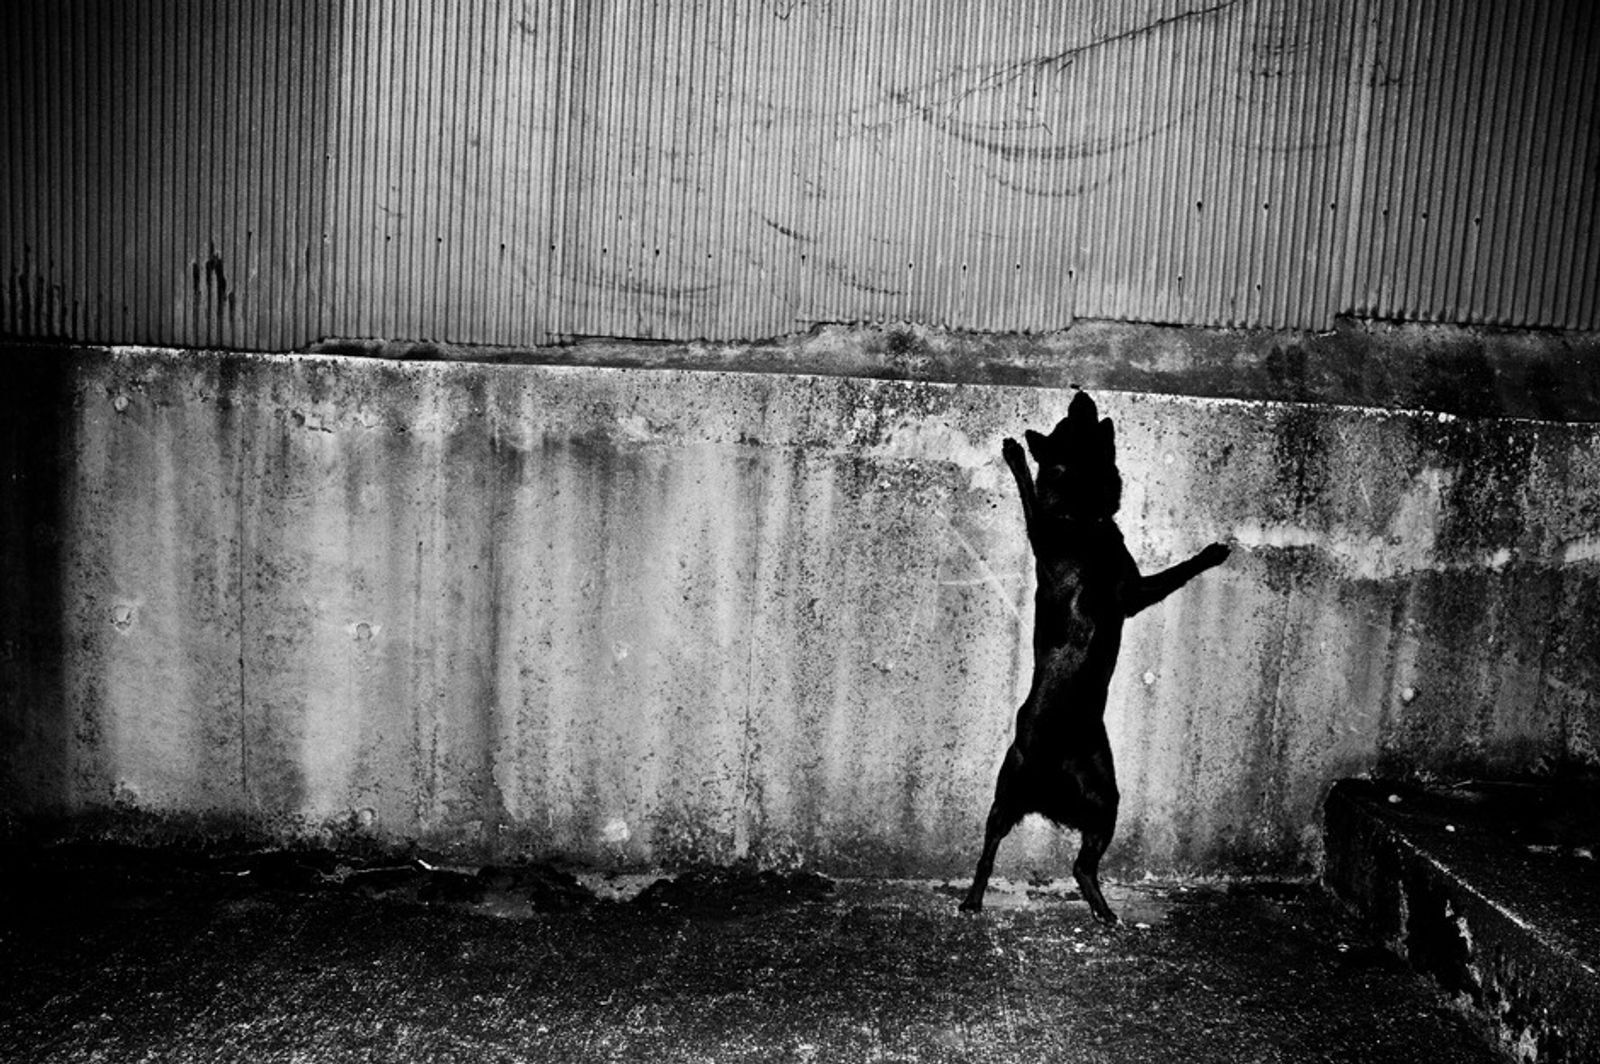 © Hajime Kimura - Image from the Man and dog photography project